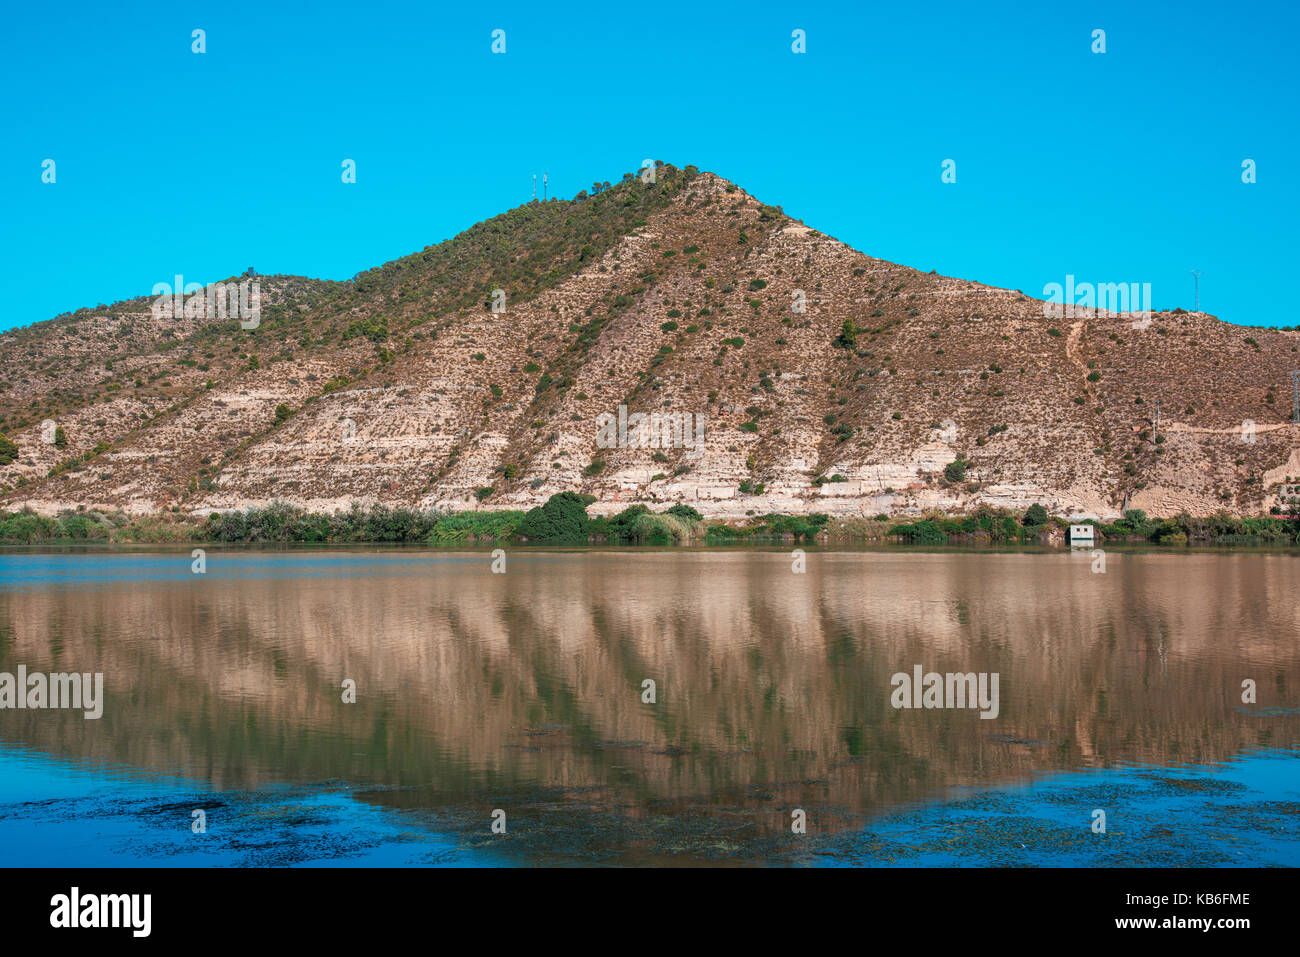 the confluence of the Segre and the Cinca rivers in Mequinenza, Spain, before to join the Ebro river Stock Photo